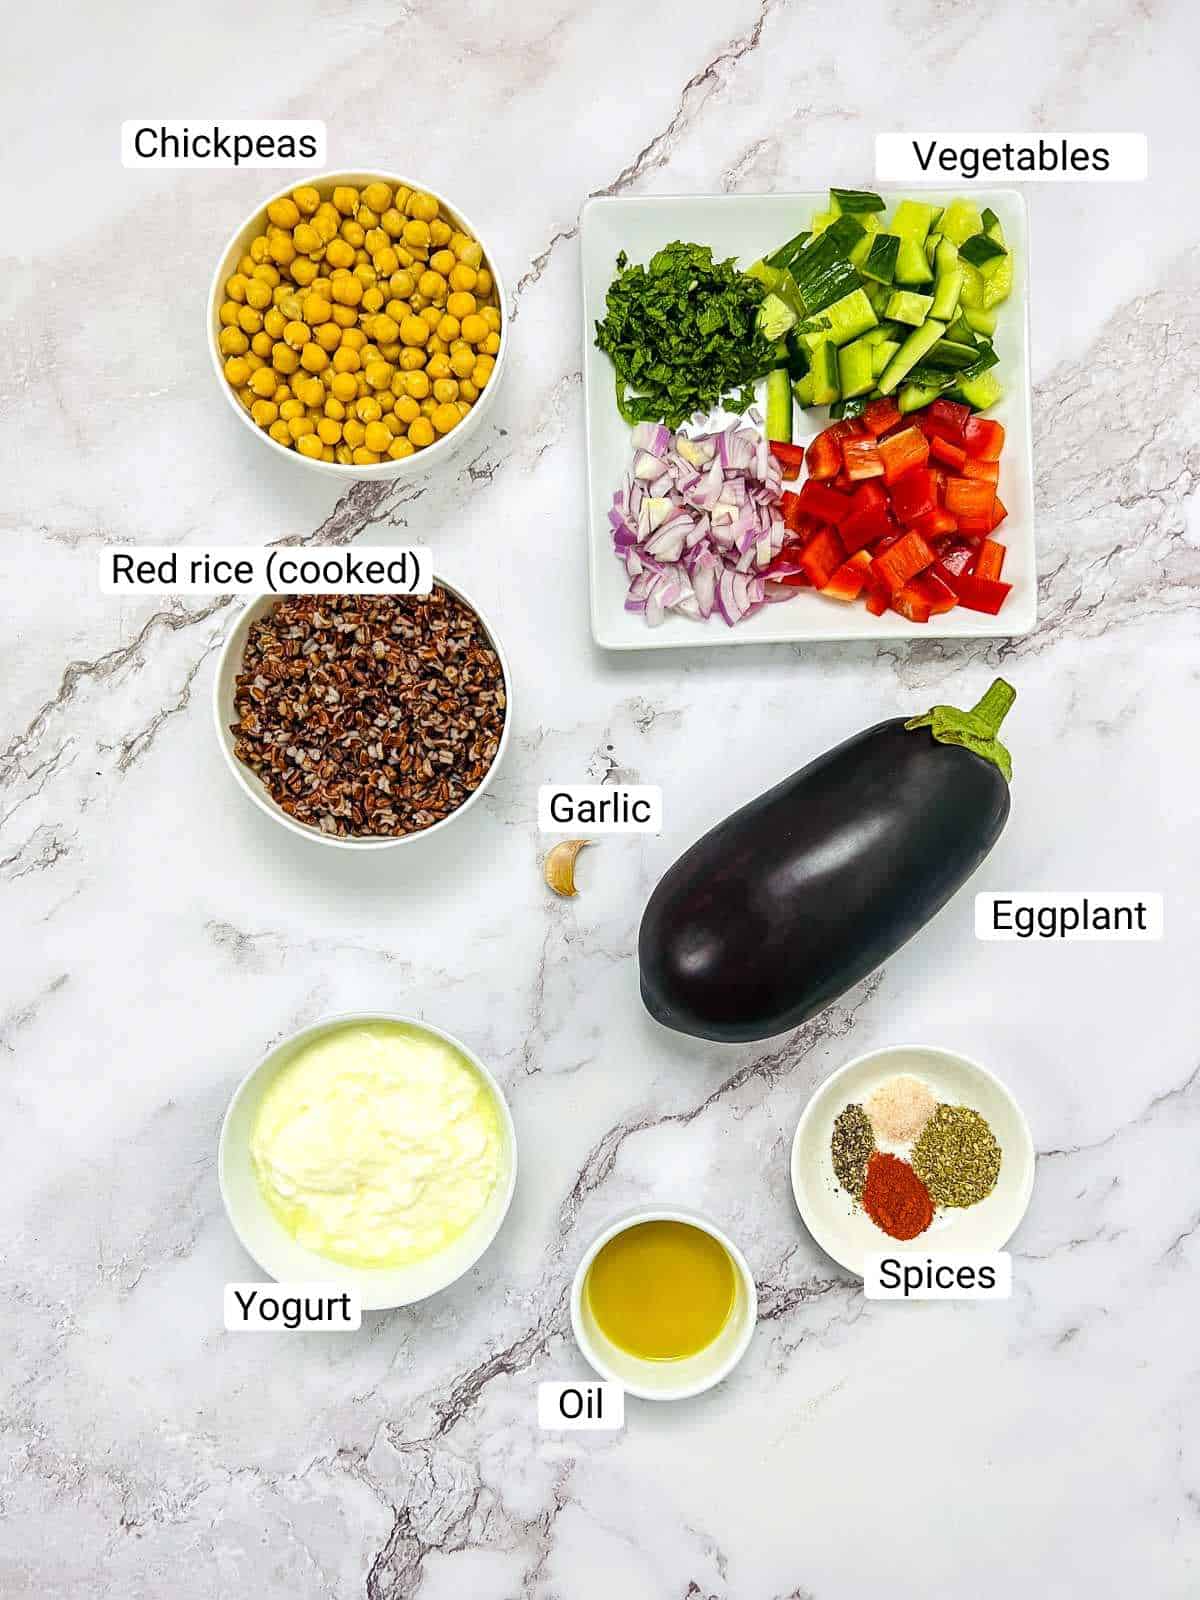 Ingredients to make eggplant chickpea buddha bowl on a white surface.